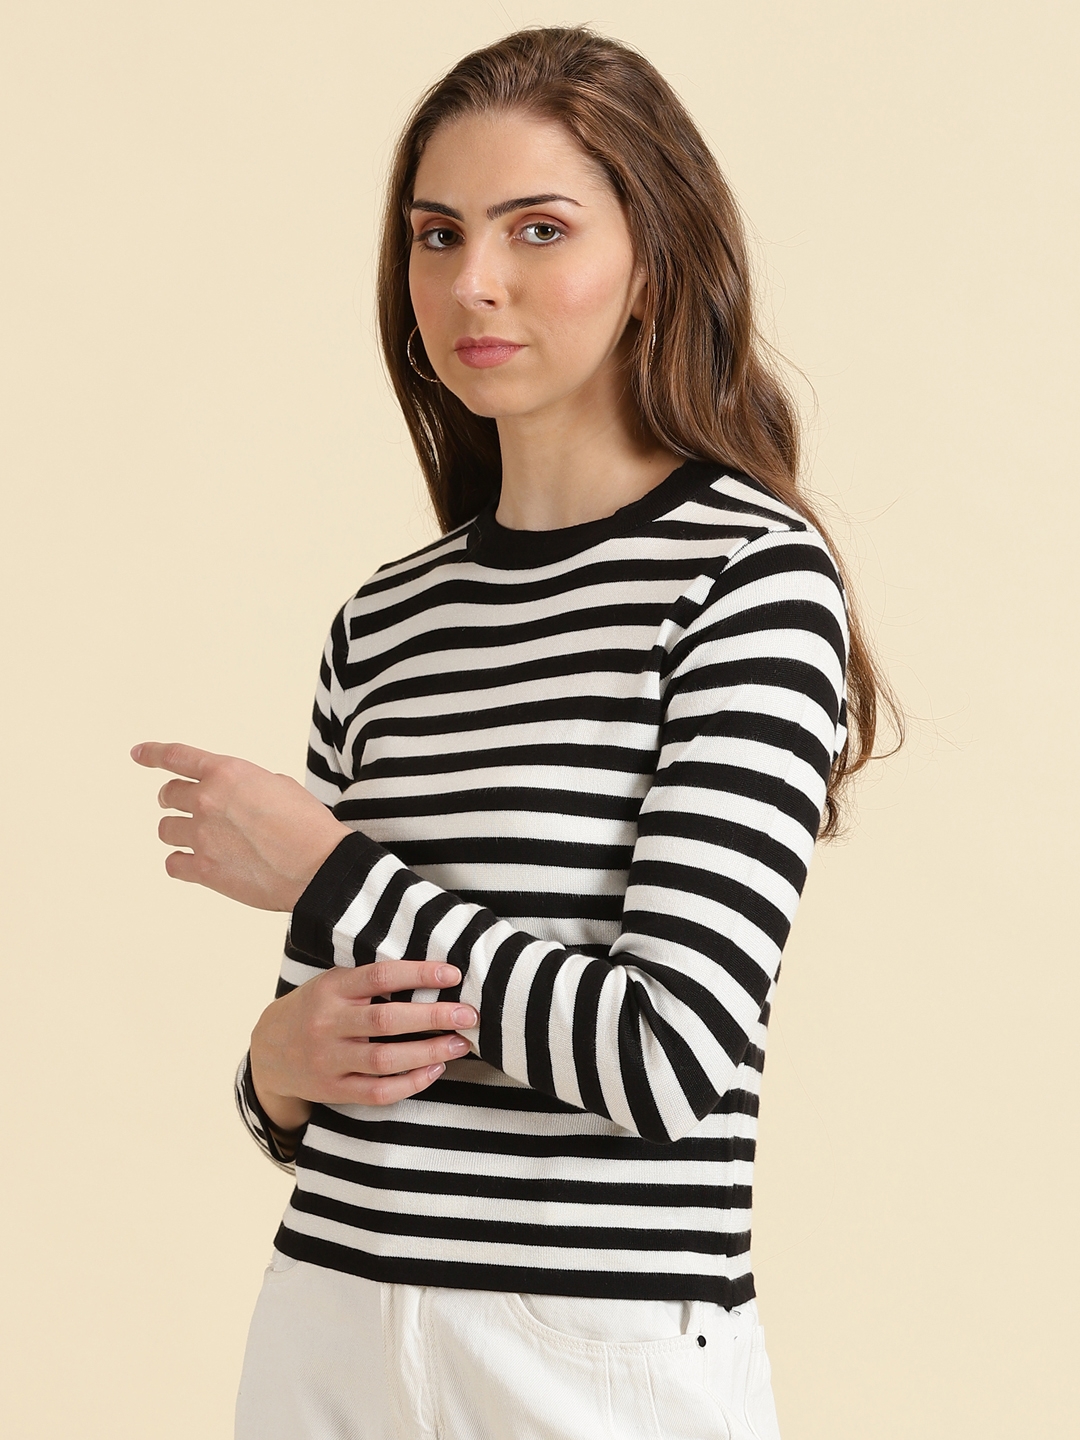 Showoff | SHOWOFF Women's Round Neck Striped Black Fitted Regular Top 2